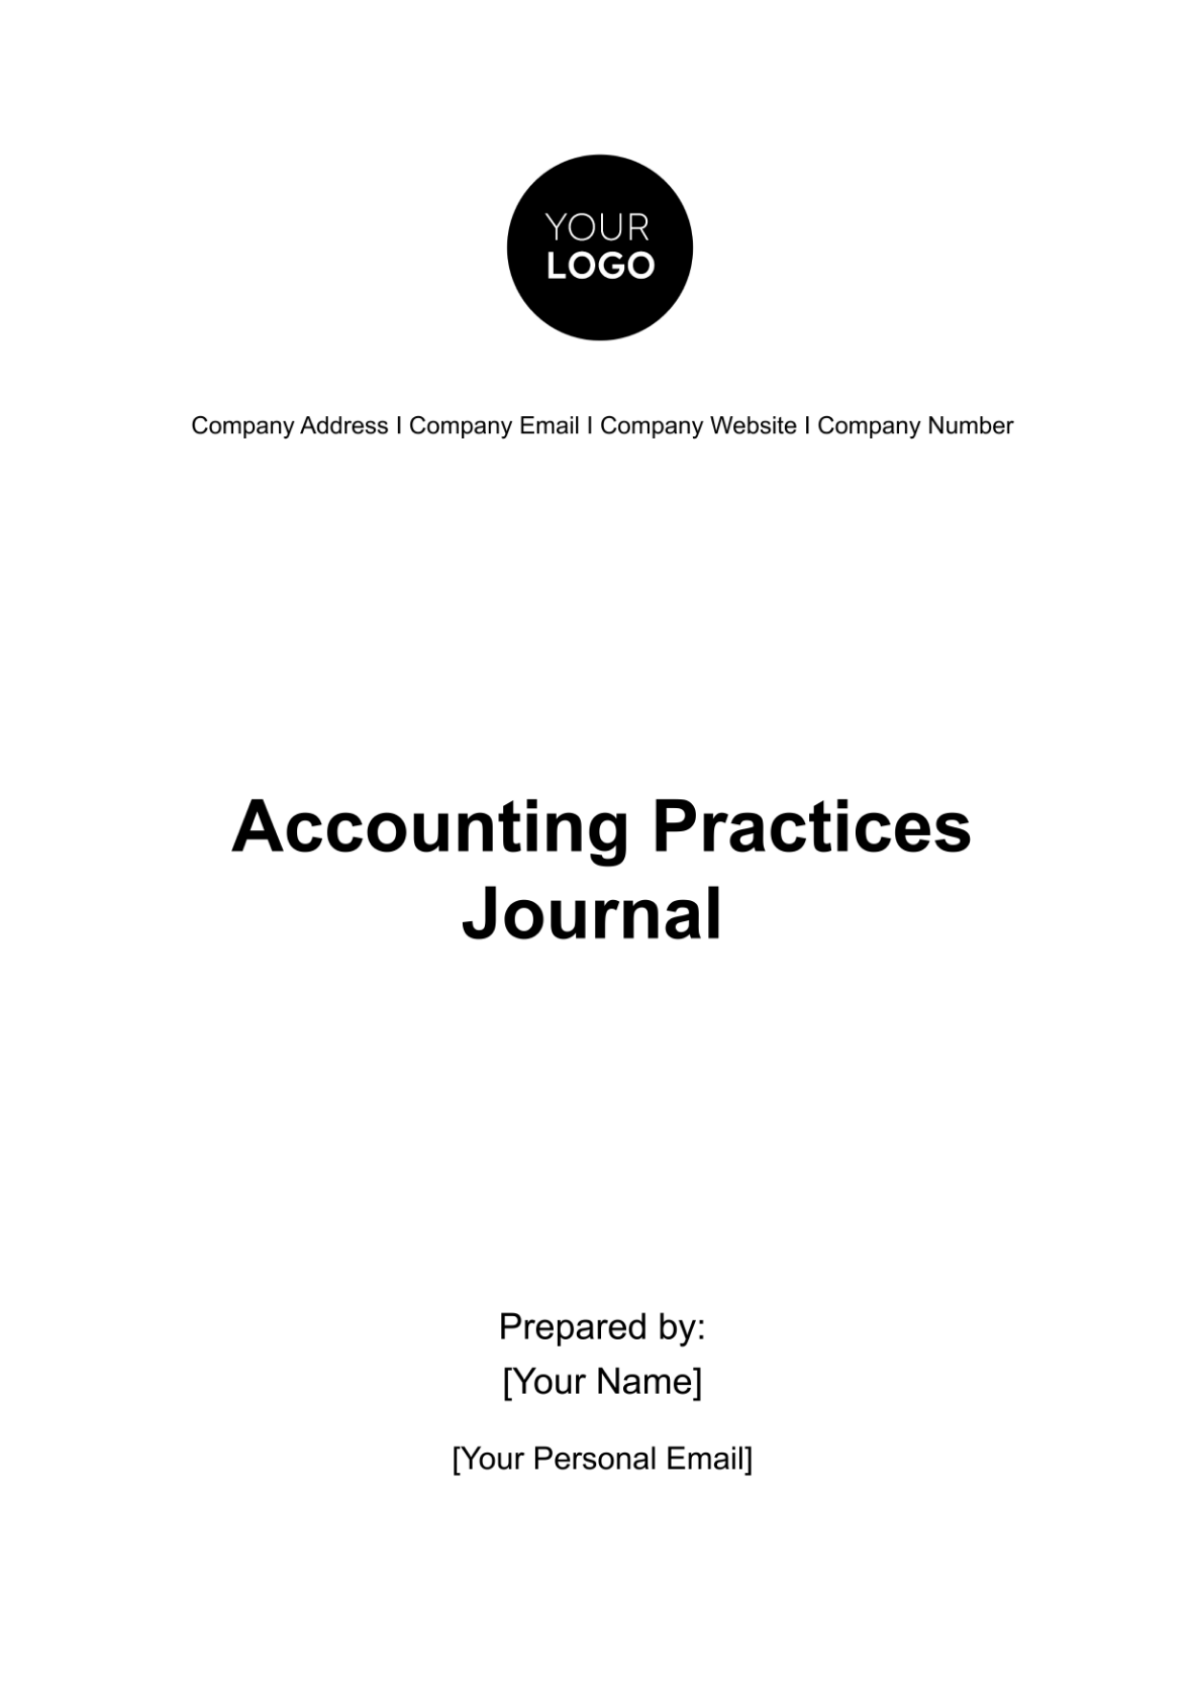 Accounting Practices Journal Template